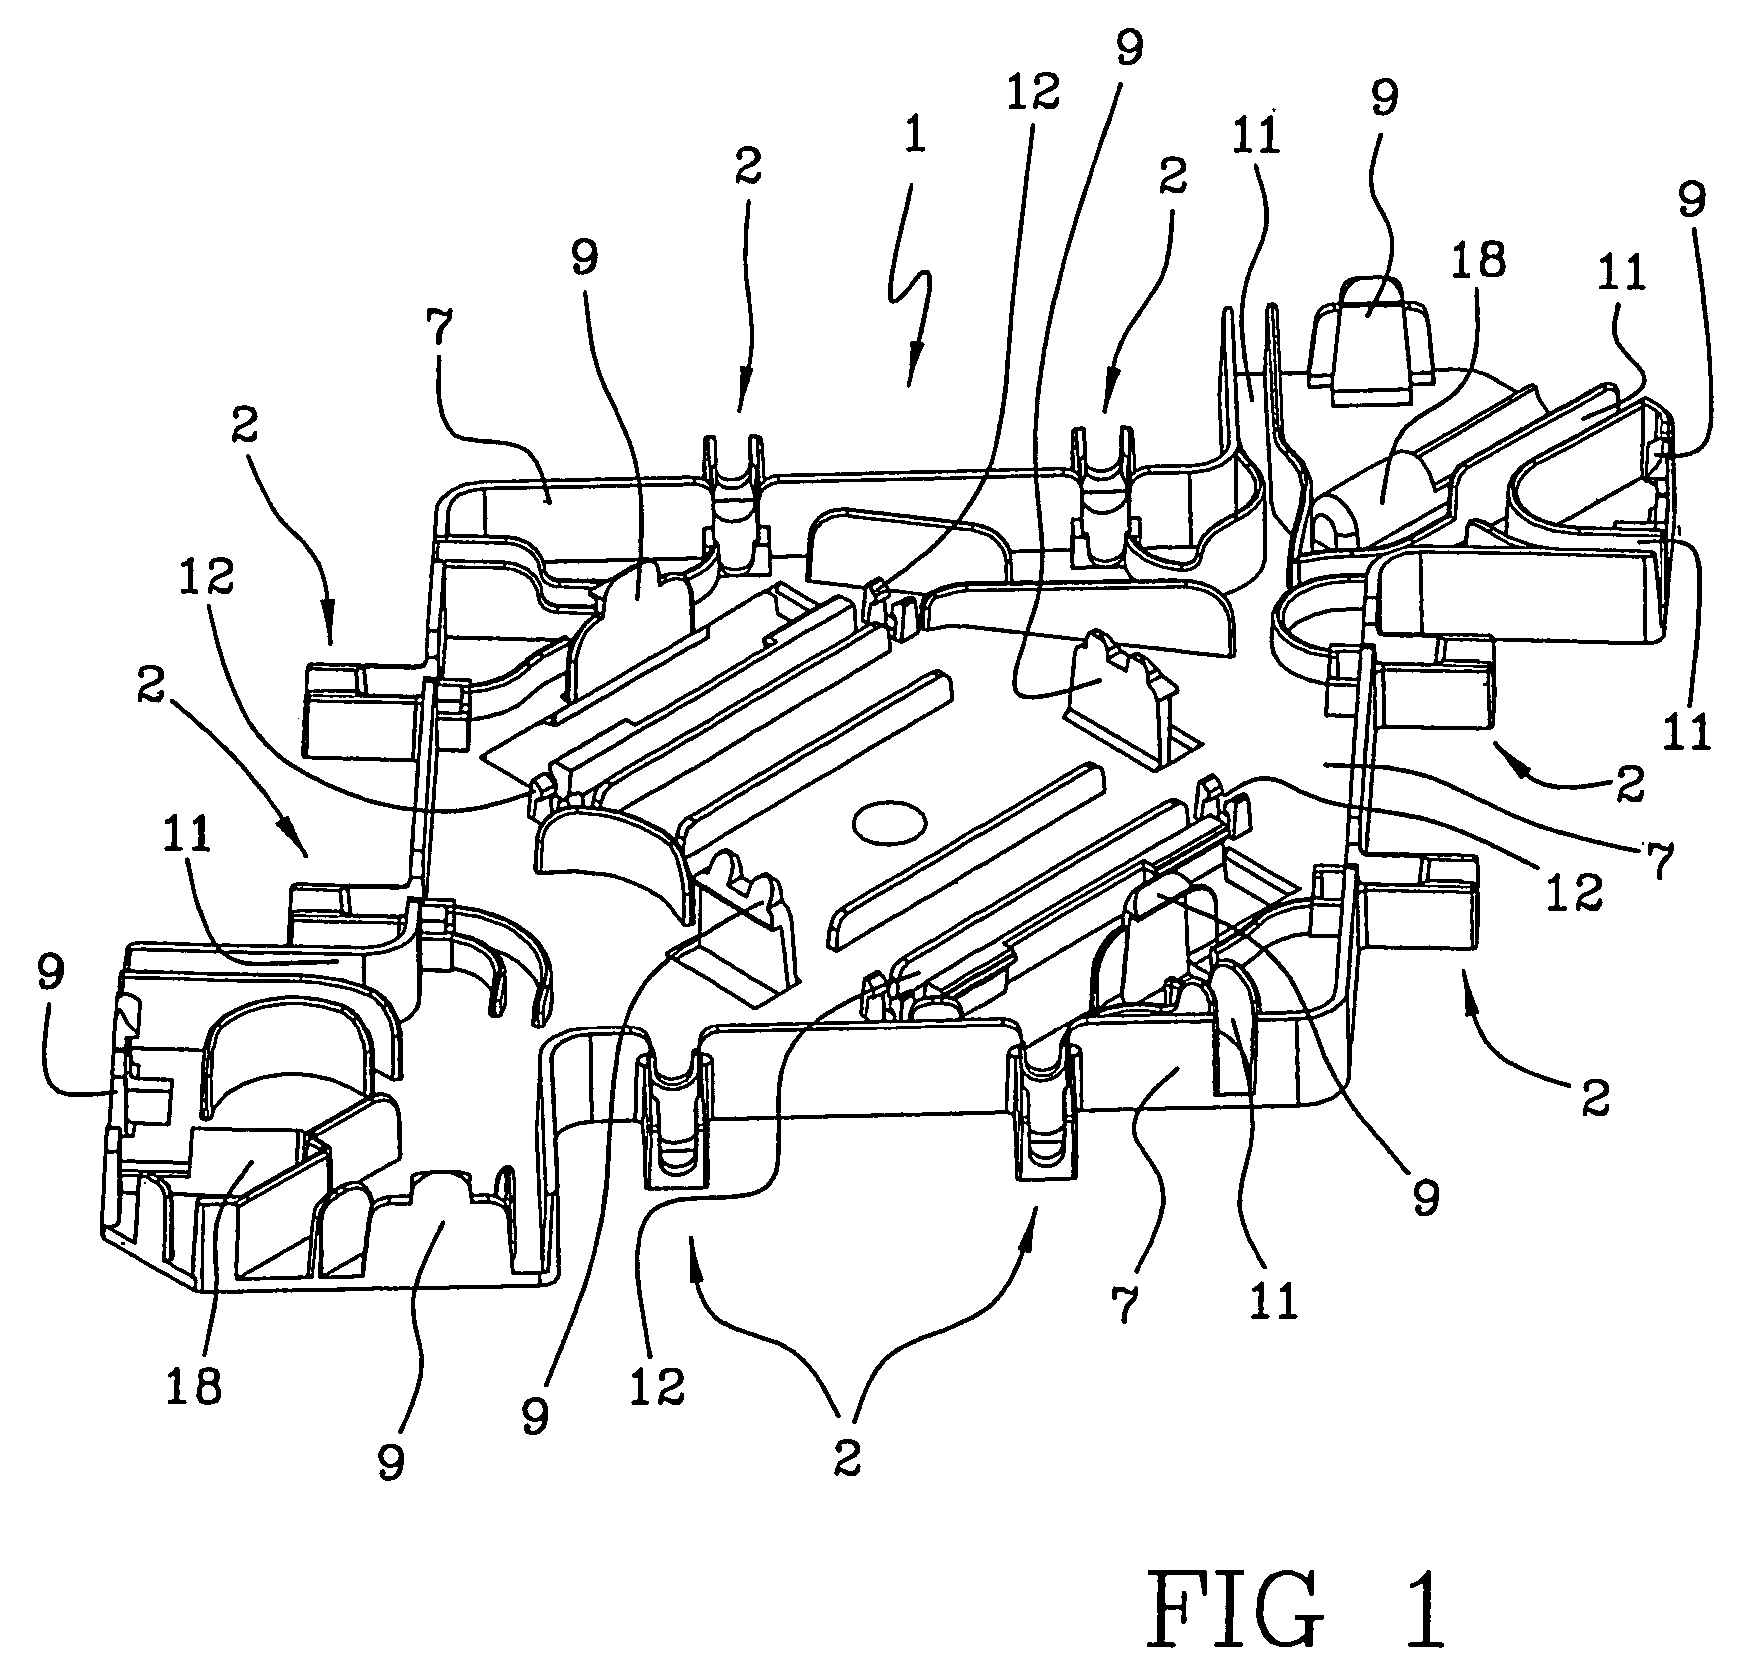 Support element, an integrated module for extracorporeal blood treatment comprising the support element, an apparatus for extracorporeal blood treatment equipped with the integrated module, and an assembly process for an integrated module for extracorporeal blood treatment